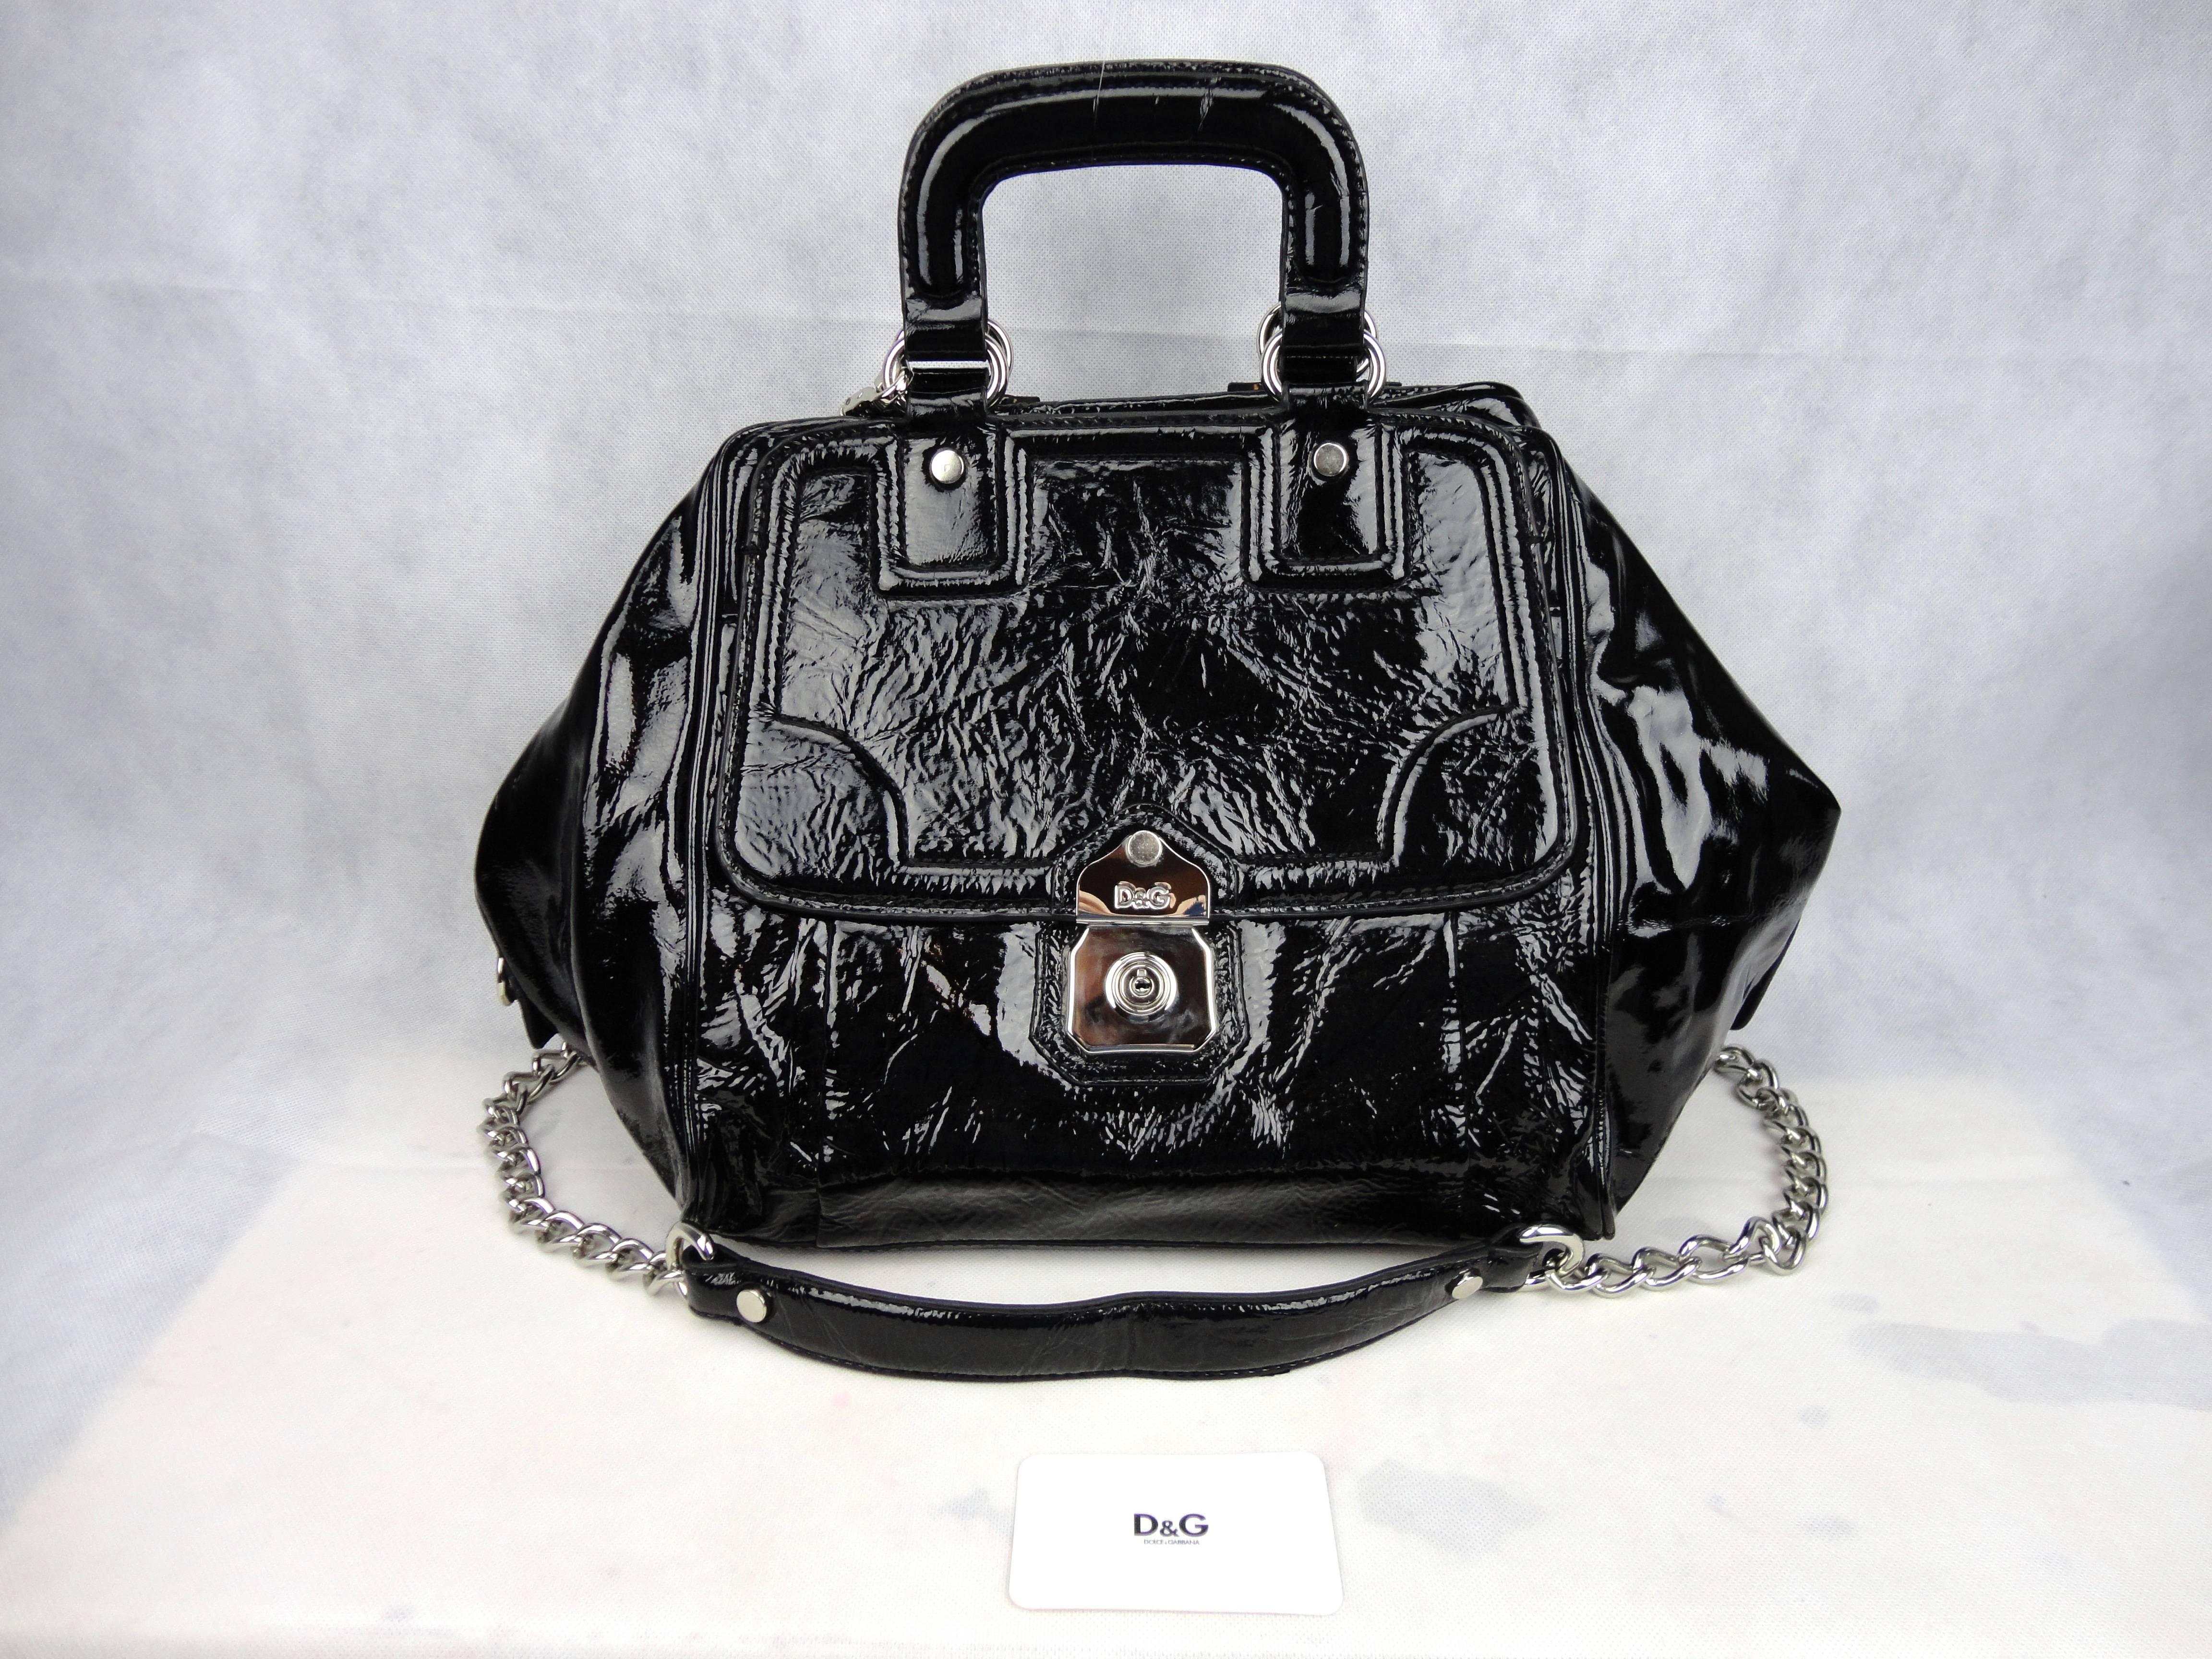 Beautiful black patent leather large Dolce & Gabbana handbag. This bag was hardly carried around and is in great condition, the inside fabric is clean an has one zip pocket. Front flap pocket and small mirror hanging, removable shoulder strap that